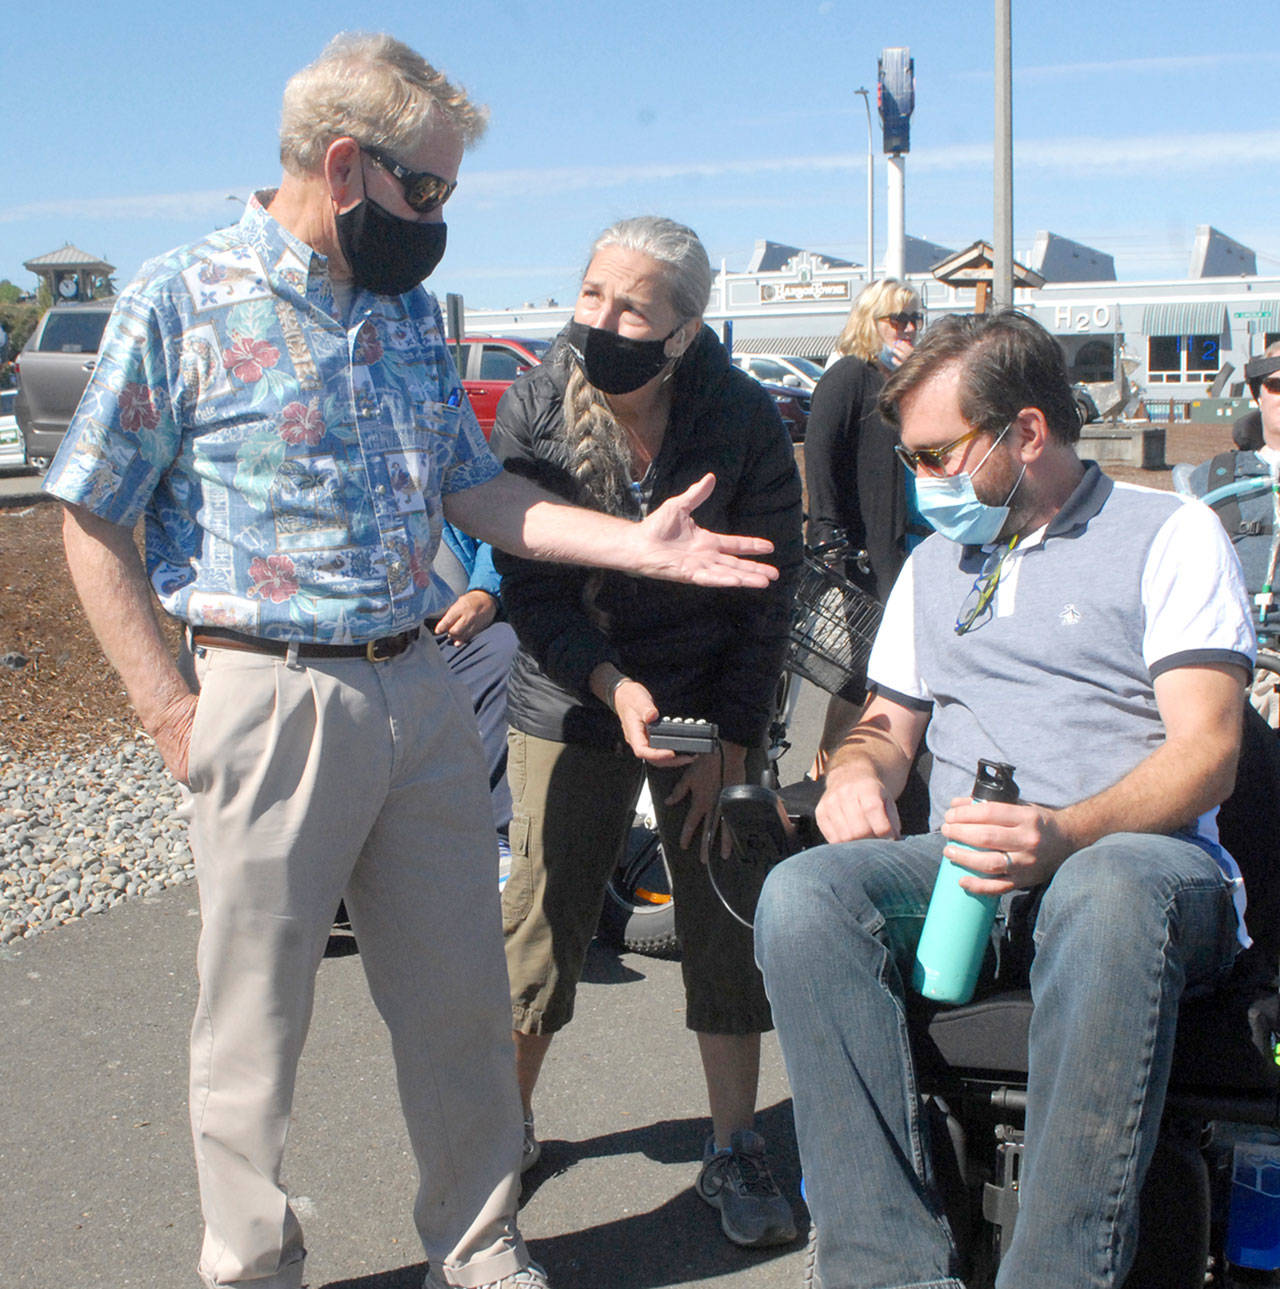 Clallam County Commissioner Randy Johnson, left, speaks with Jefferson County Commissioner Greg Brotherton, seated, as the pair receive motorized wheelchair advice 
Aug. 28 from Teena Woodward, mother of Ian Mackay, founder of Ian’s Ride. Photo by Keith Thorpe/Olympic Peninsula News Group